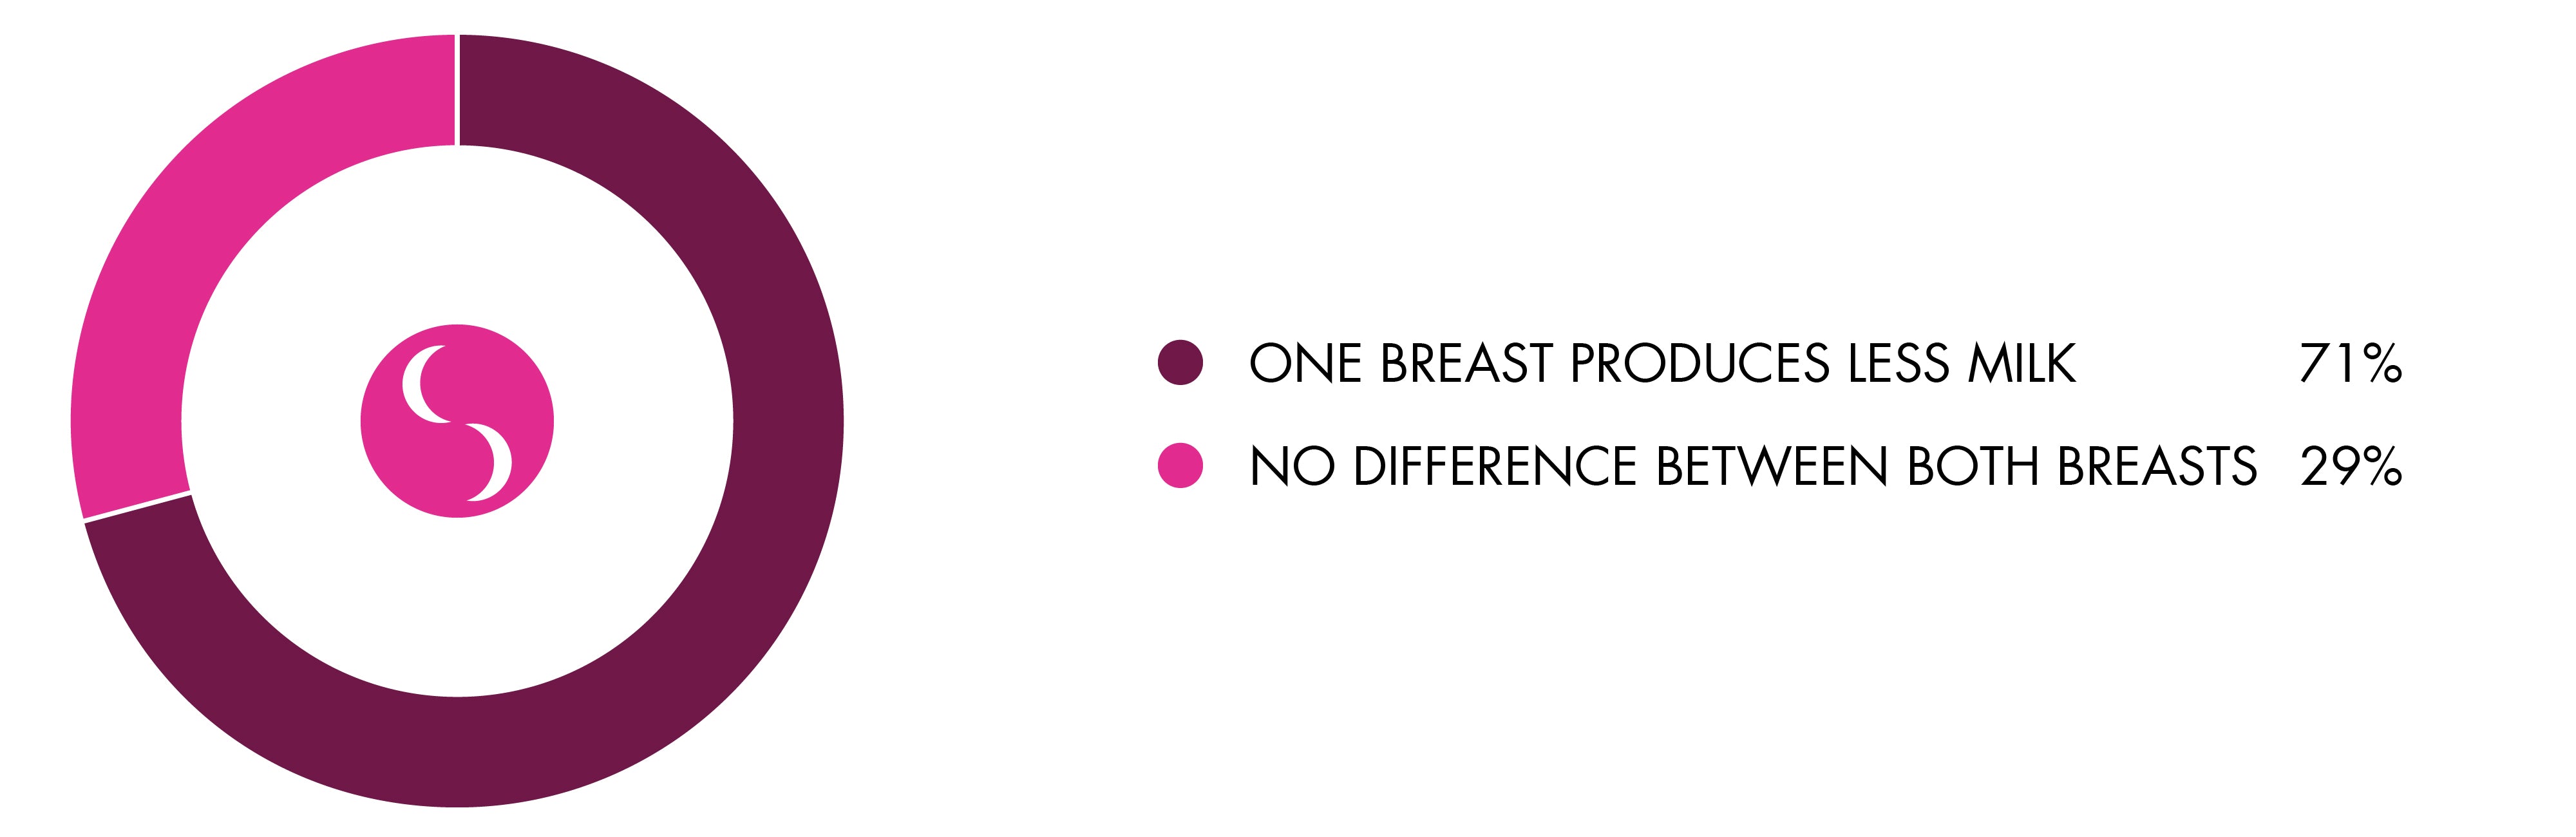 one-breast-producing-less-milk-graph